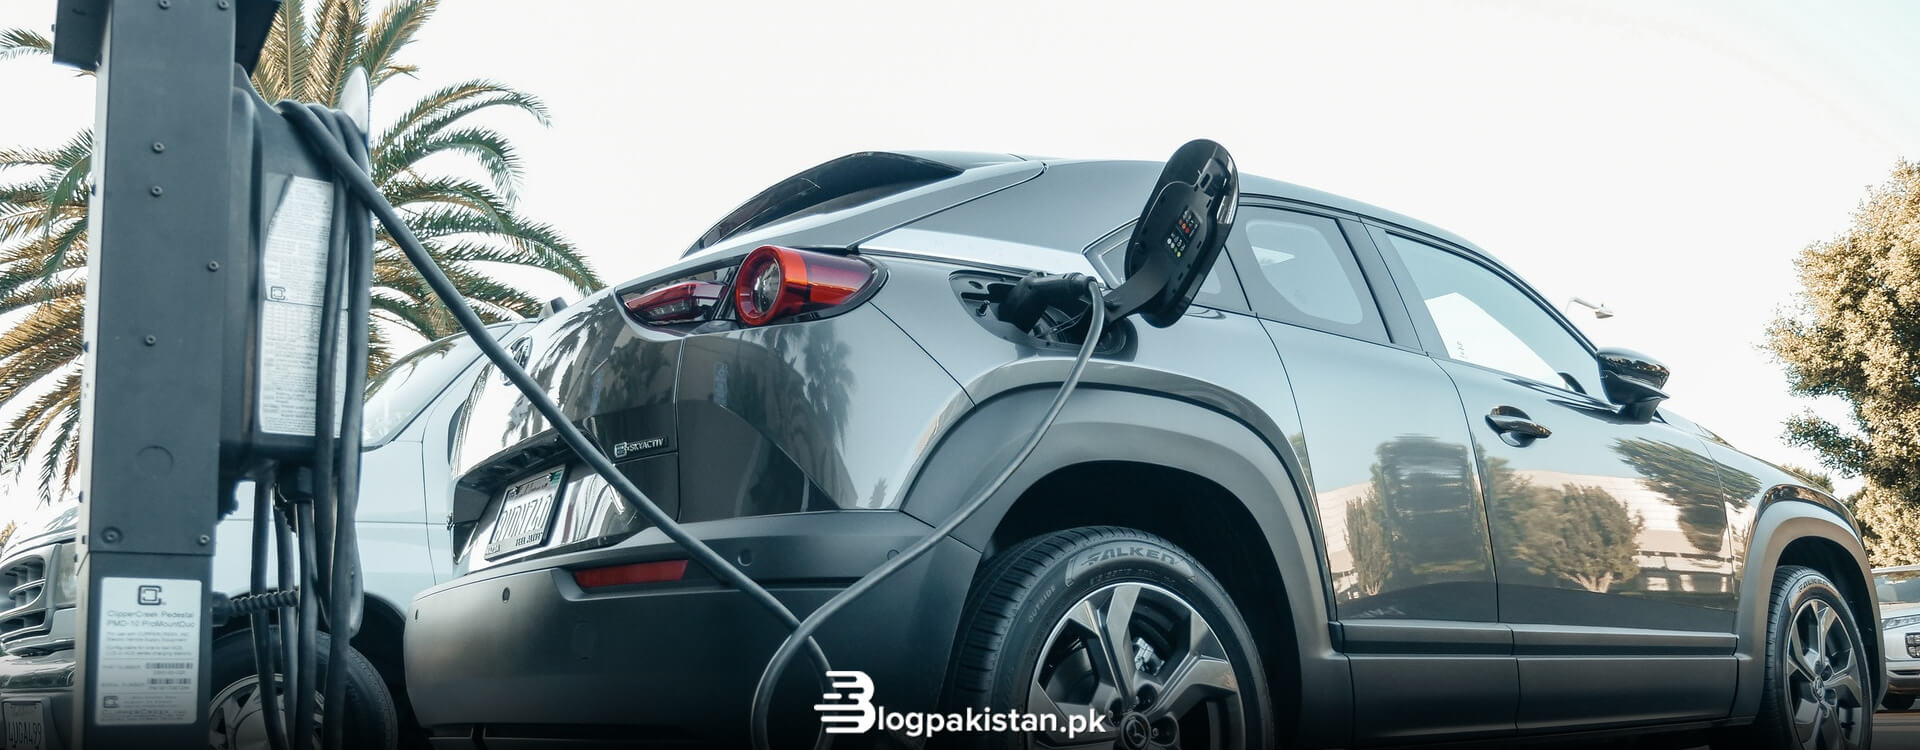 Electric car charging station in Islamabad